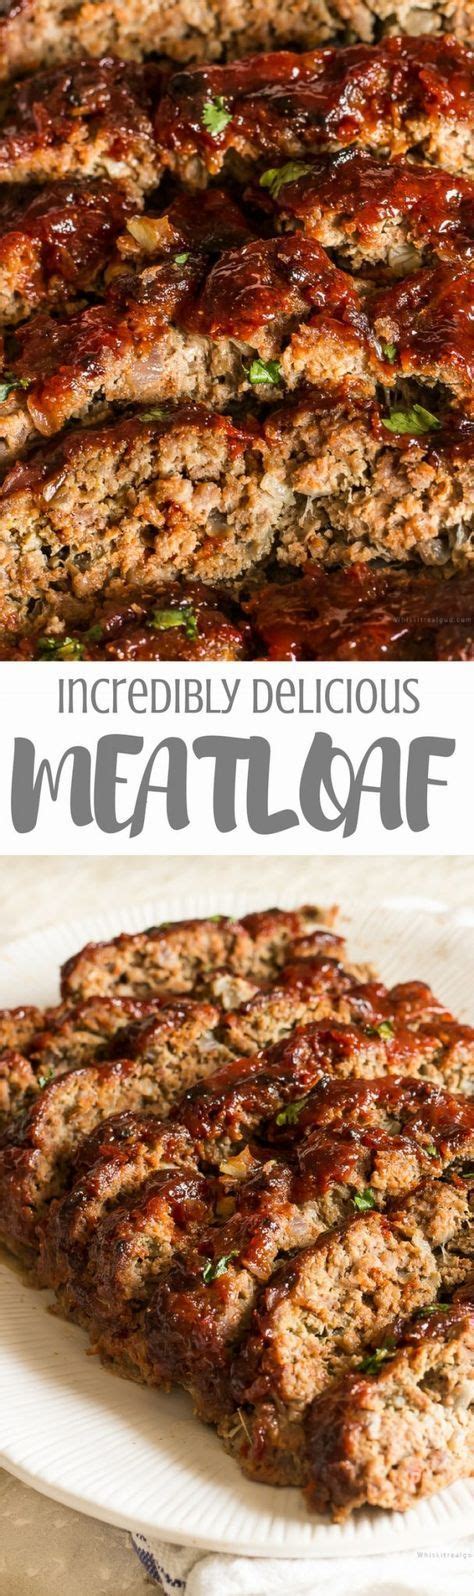 These are easier and healthier than traditional meatloaf! The Best Meatloaf | Recipe | Good meatloaf recipe, Best meatloaf, Food recipes